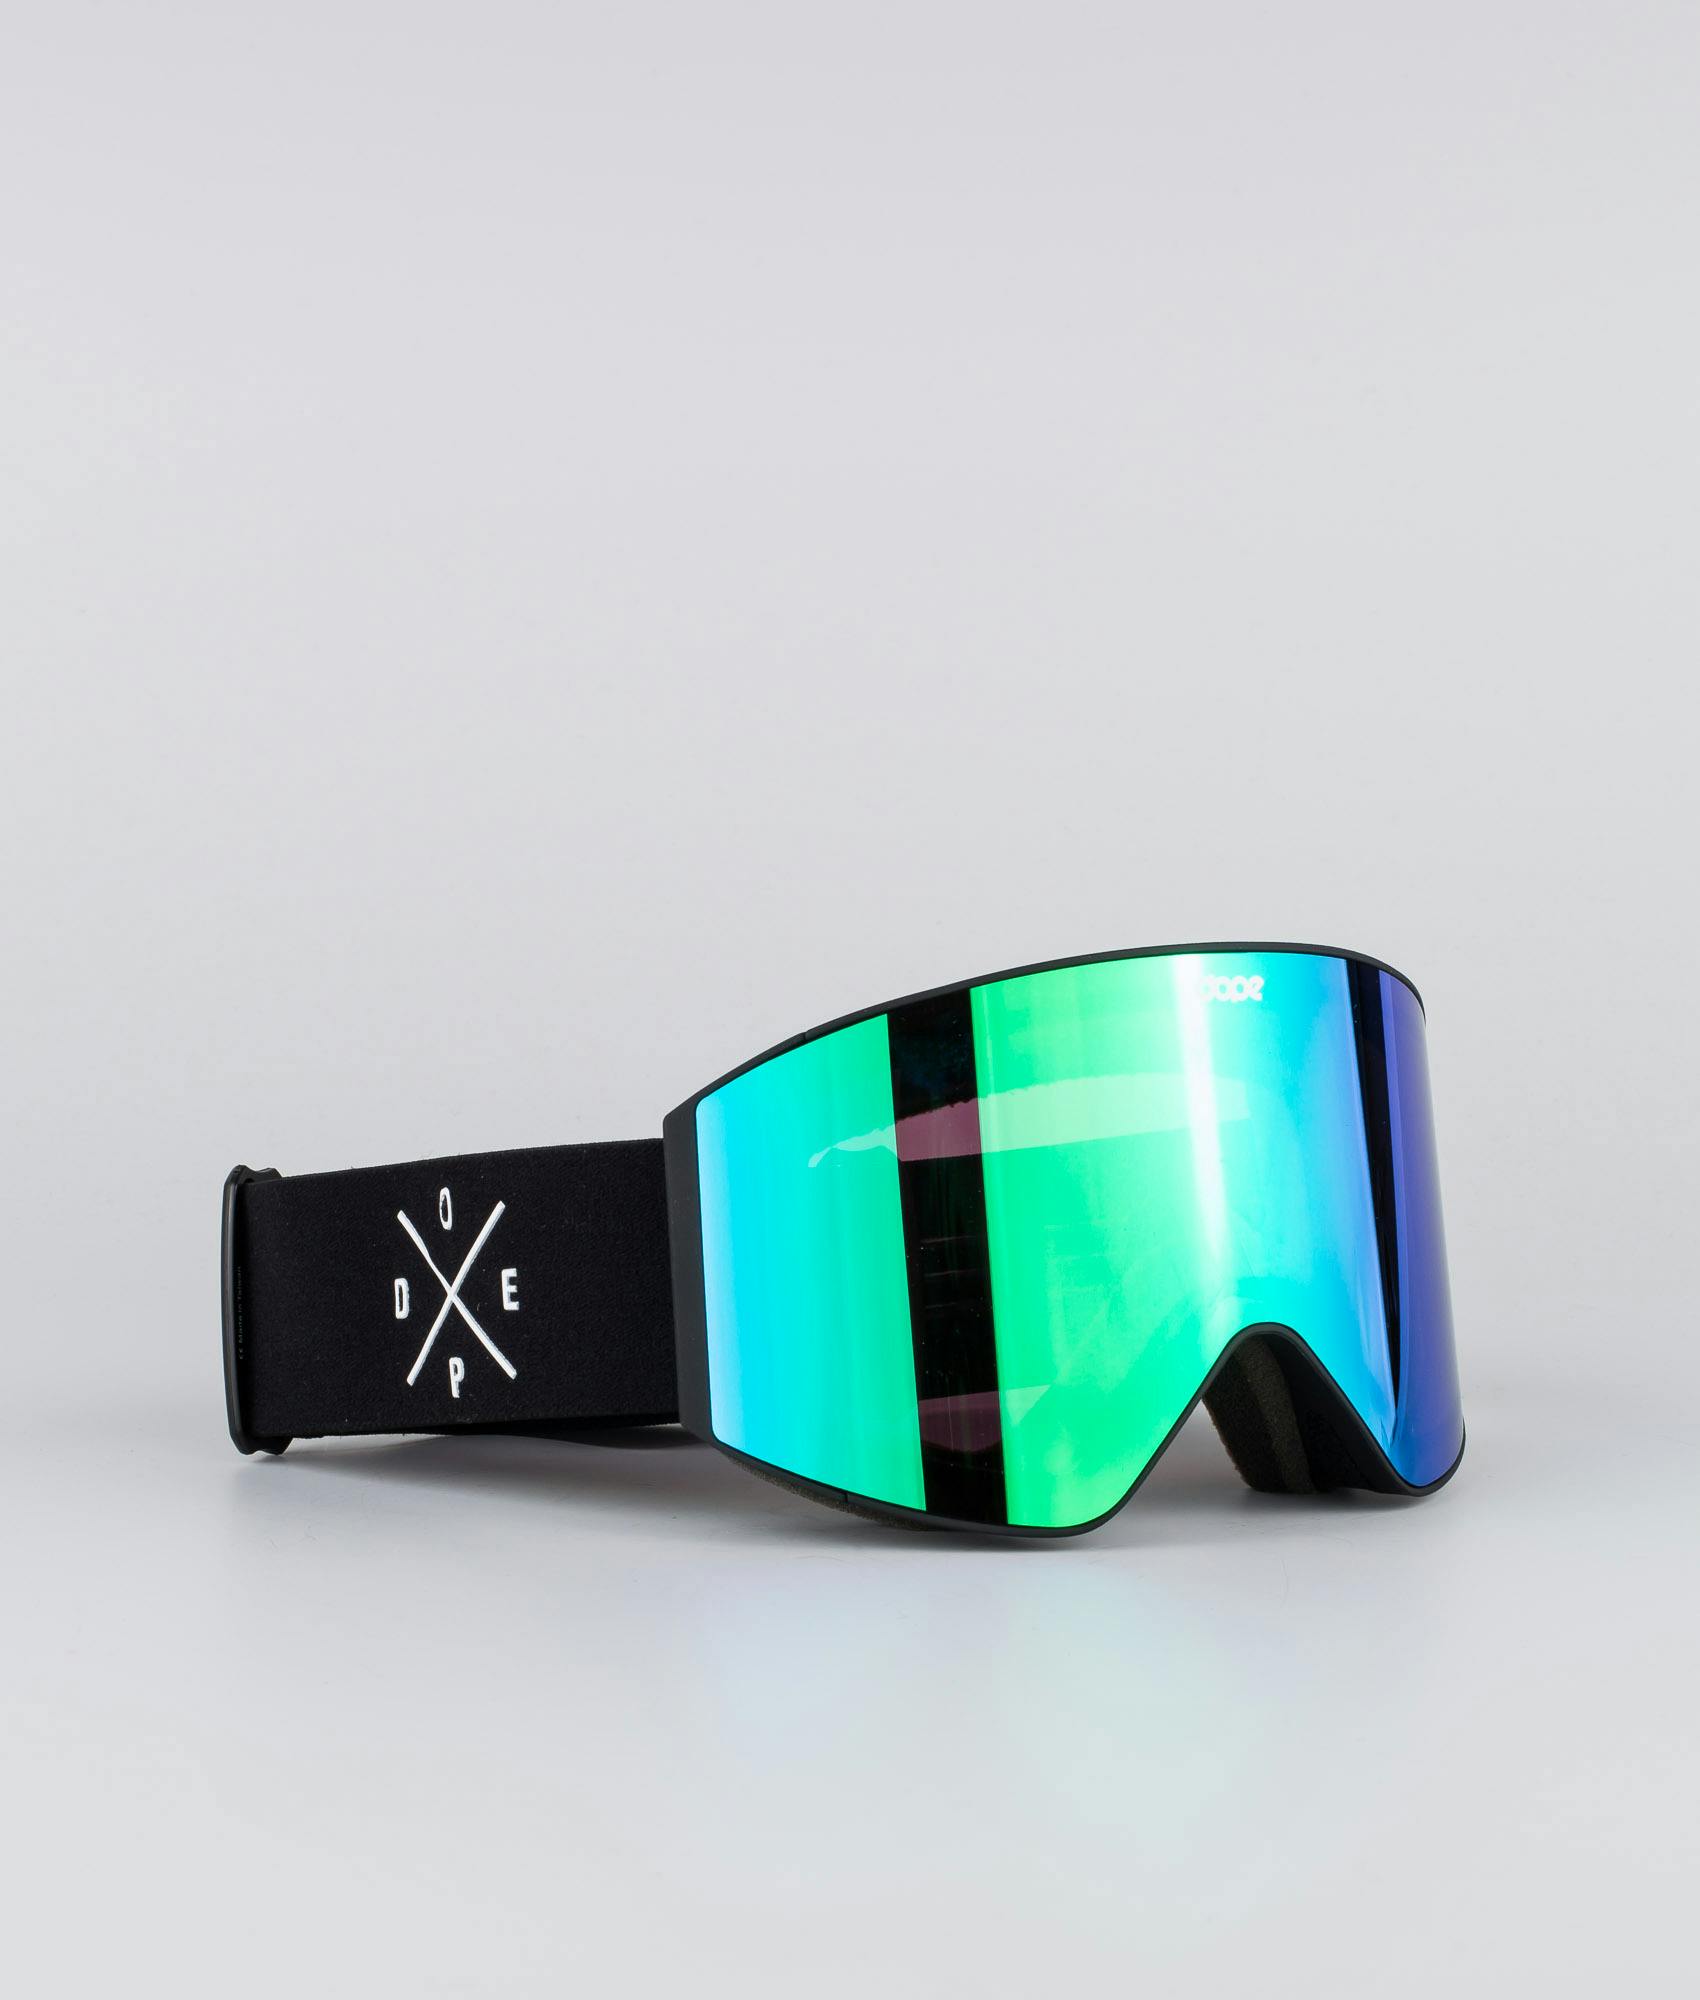 Frequently asked questions about goggle lens colour